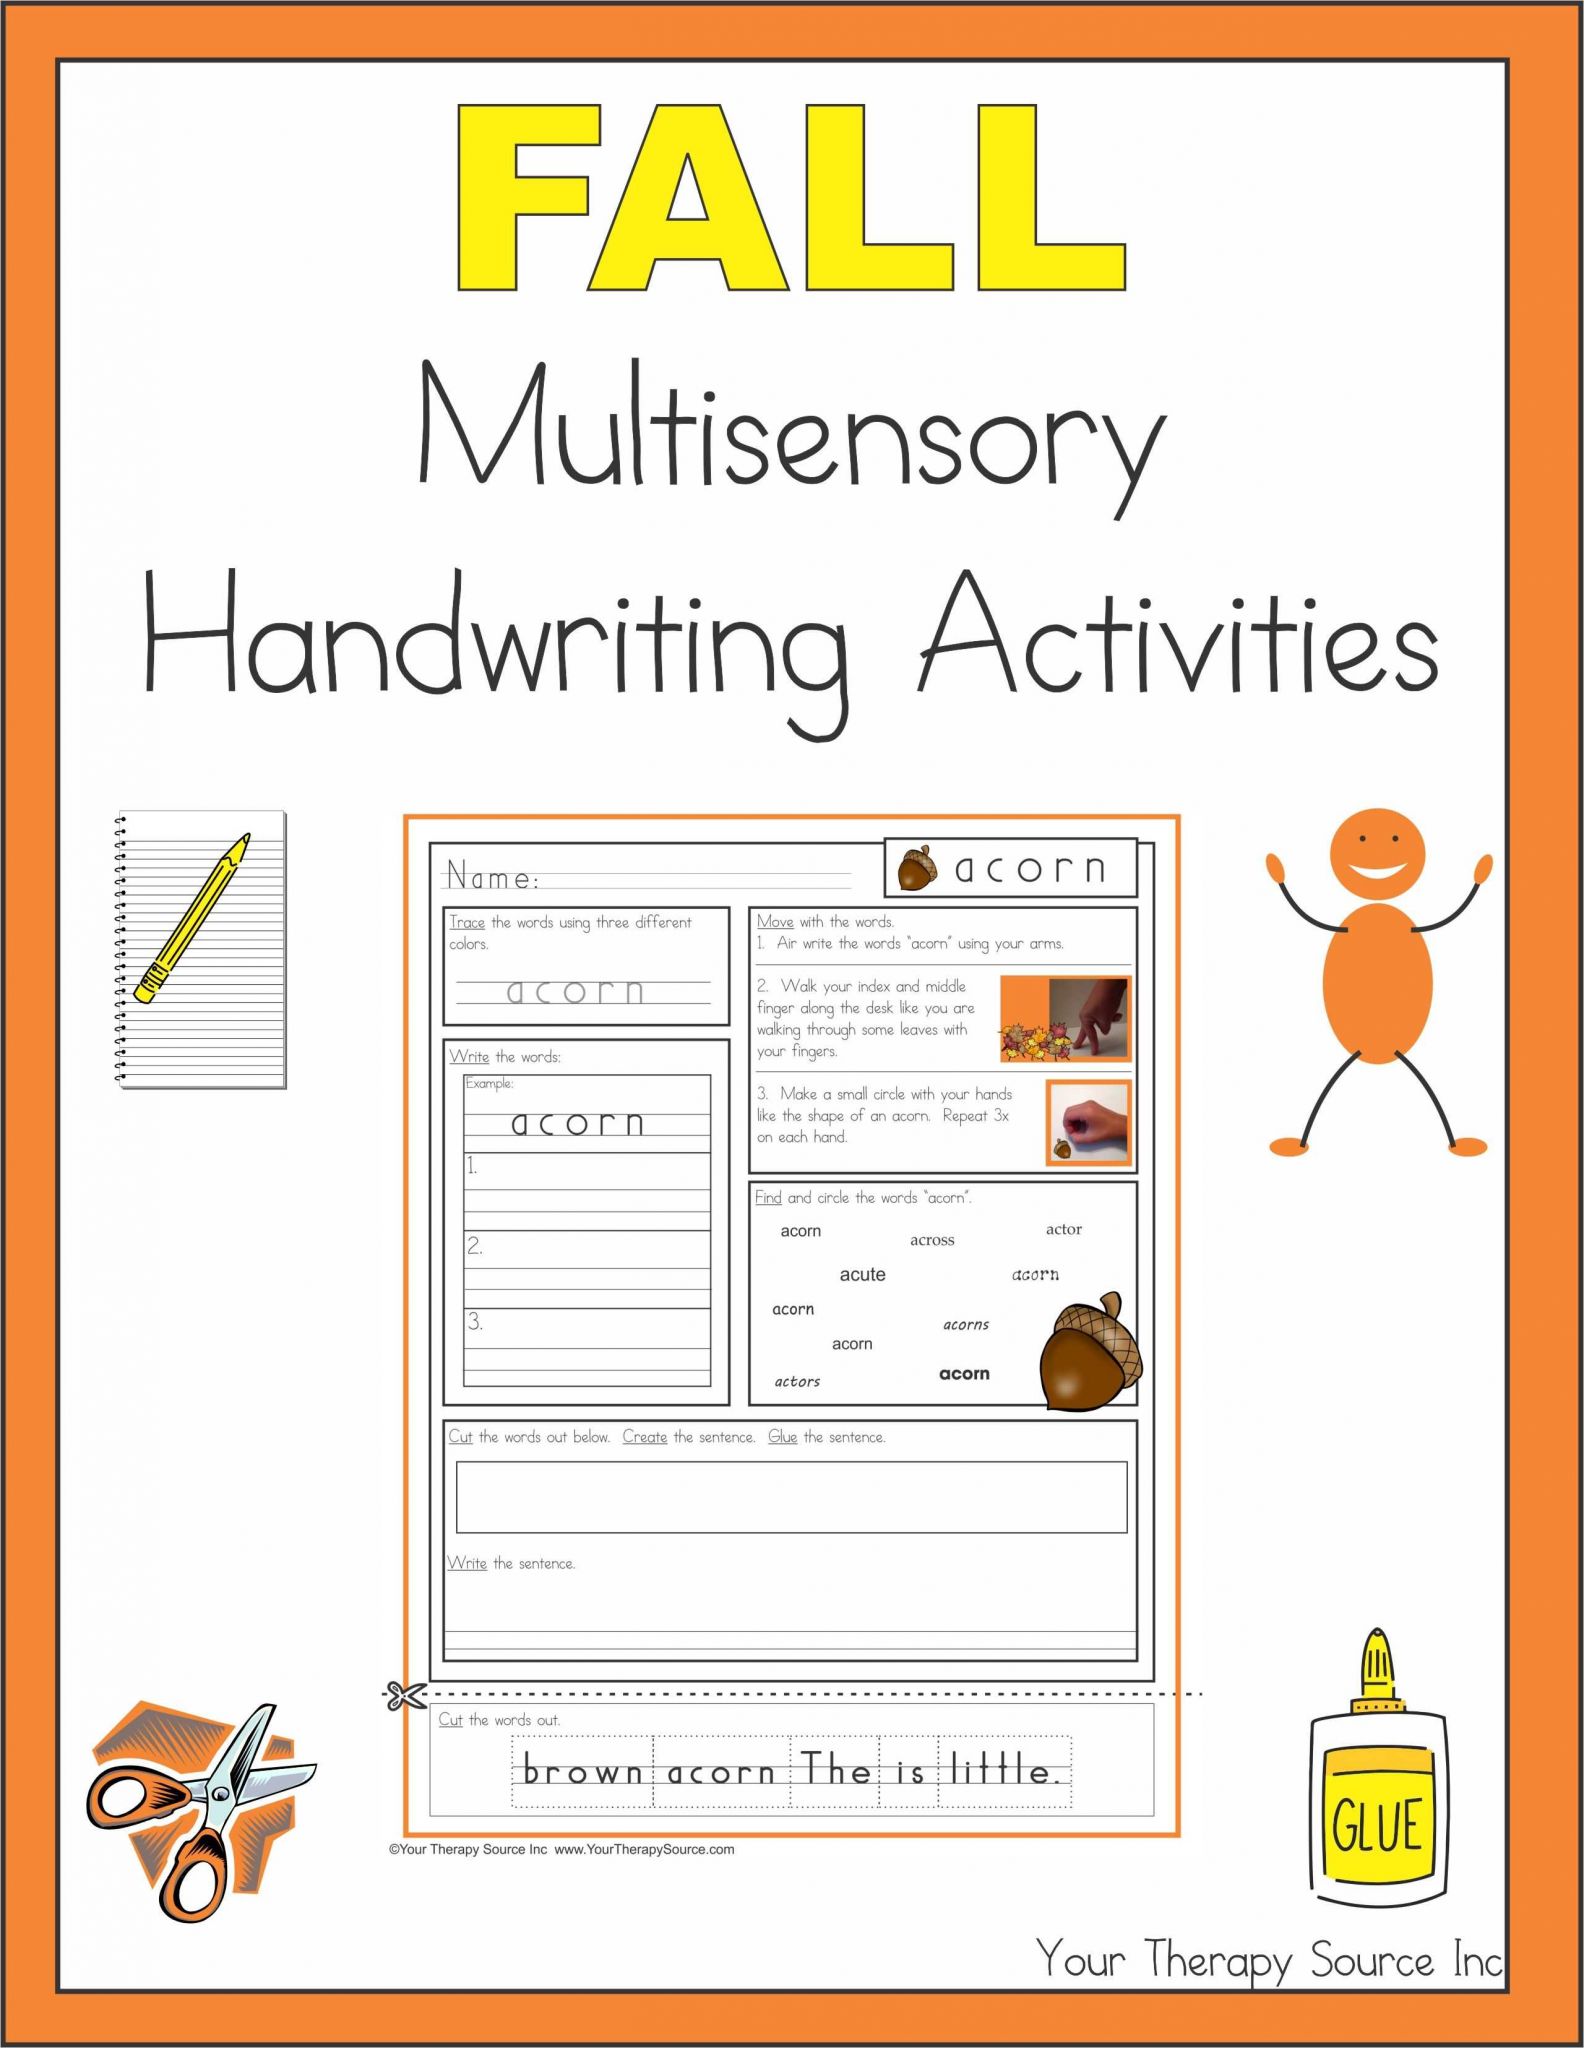 Handwriting Practice Worksheets Also Fall Multisensory Handwriting Activities Fall Multisensory